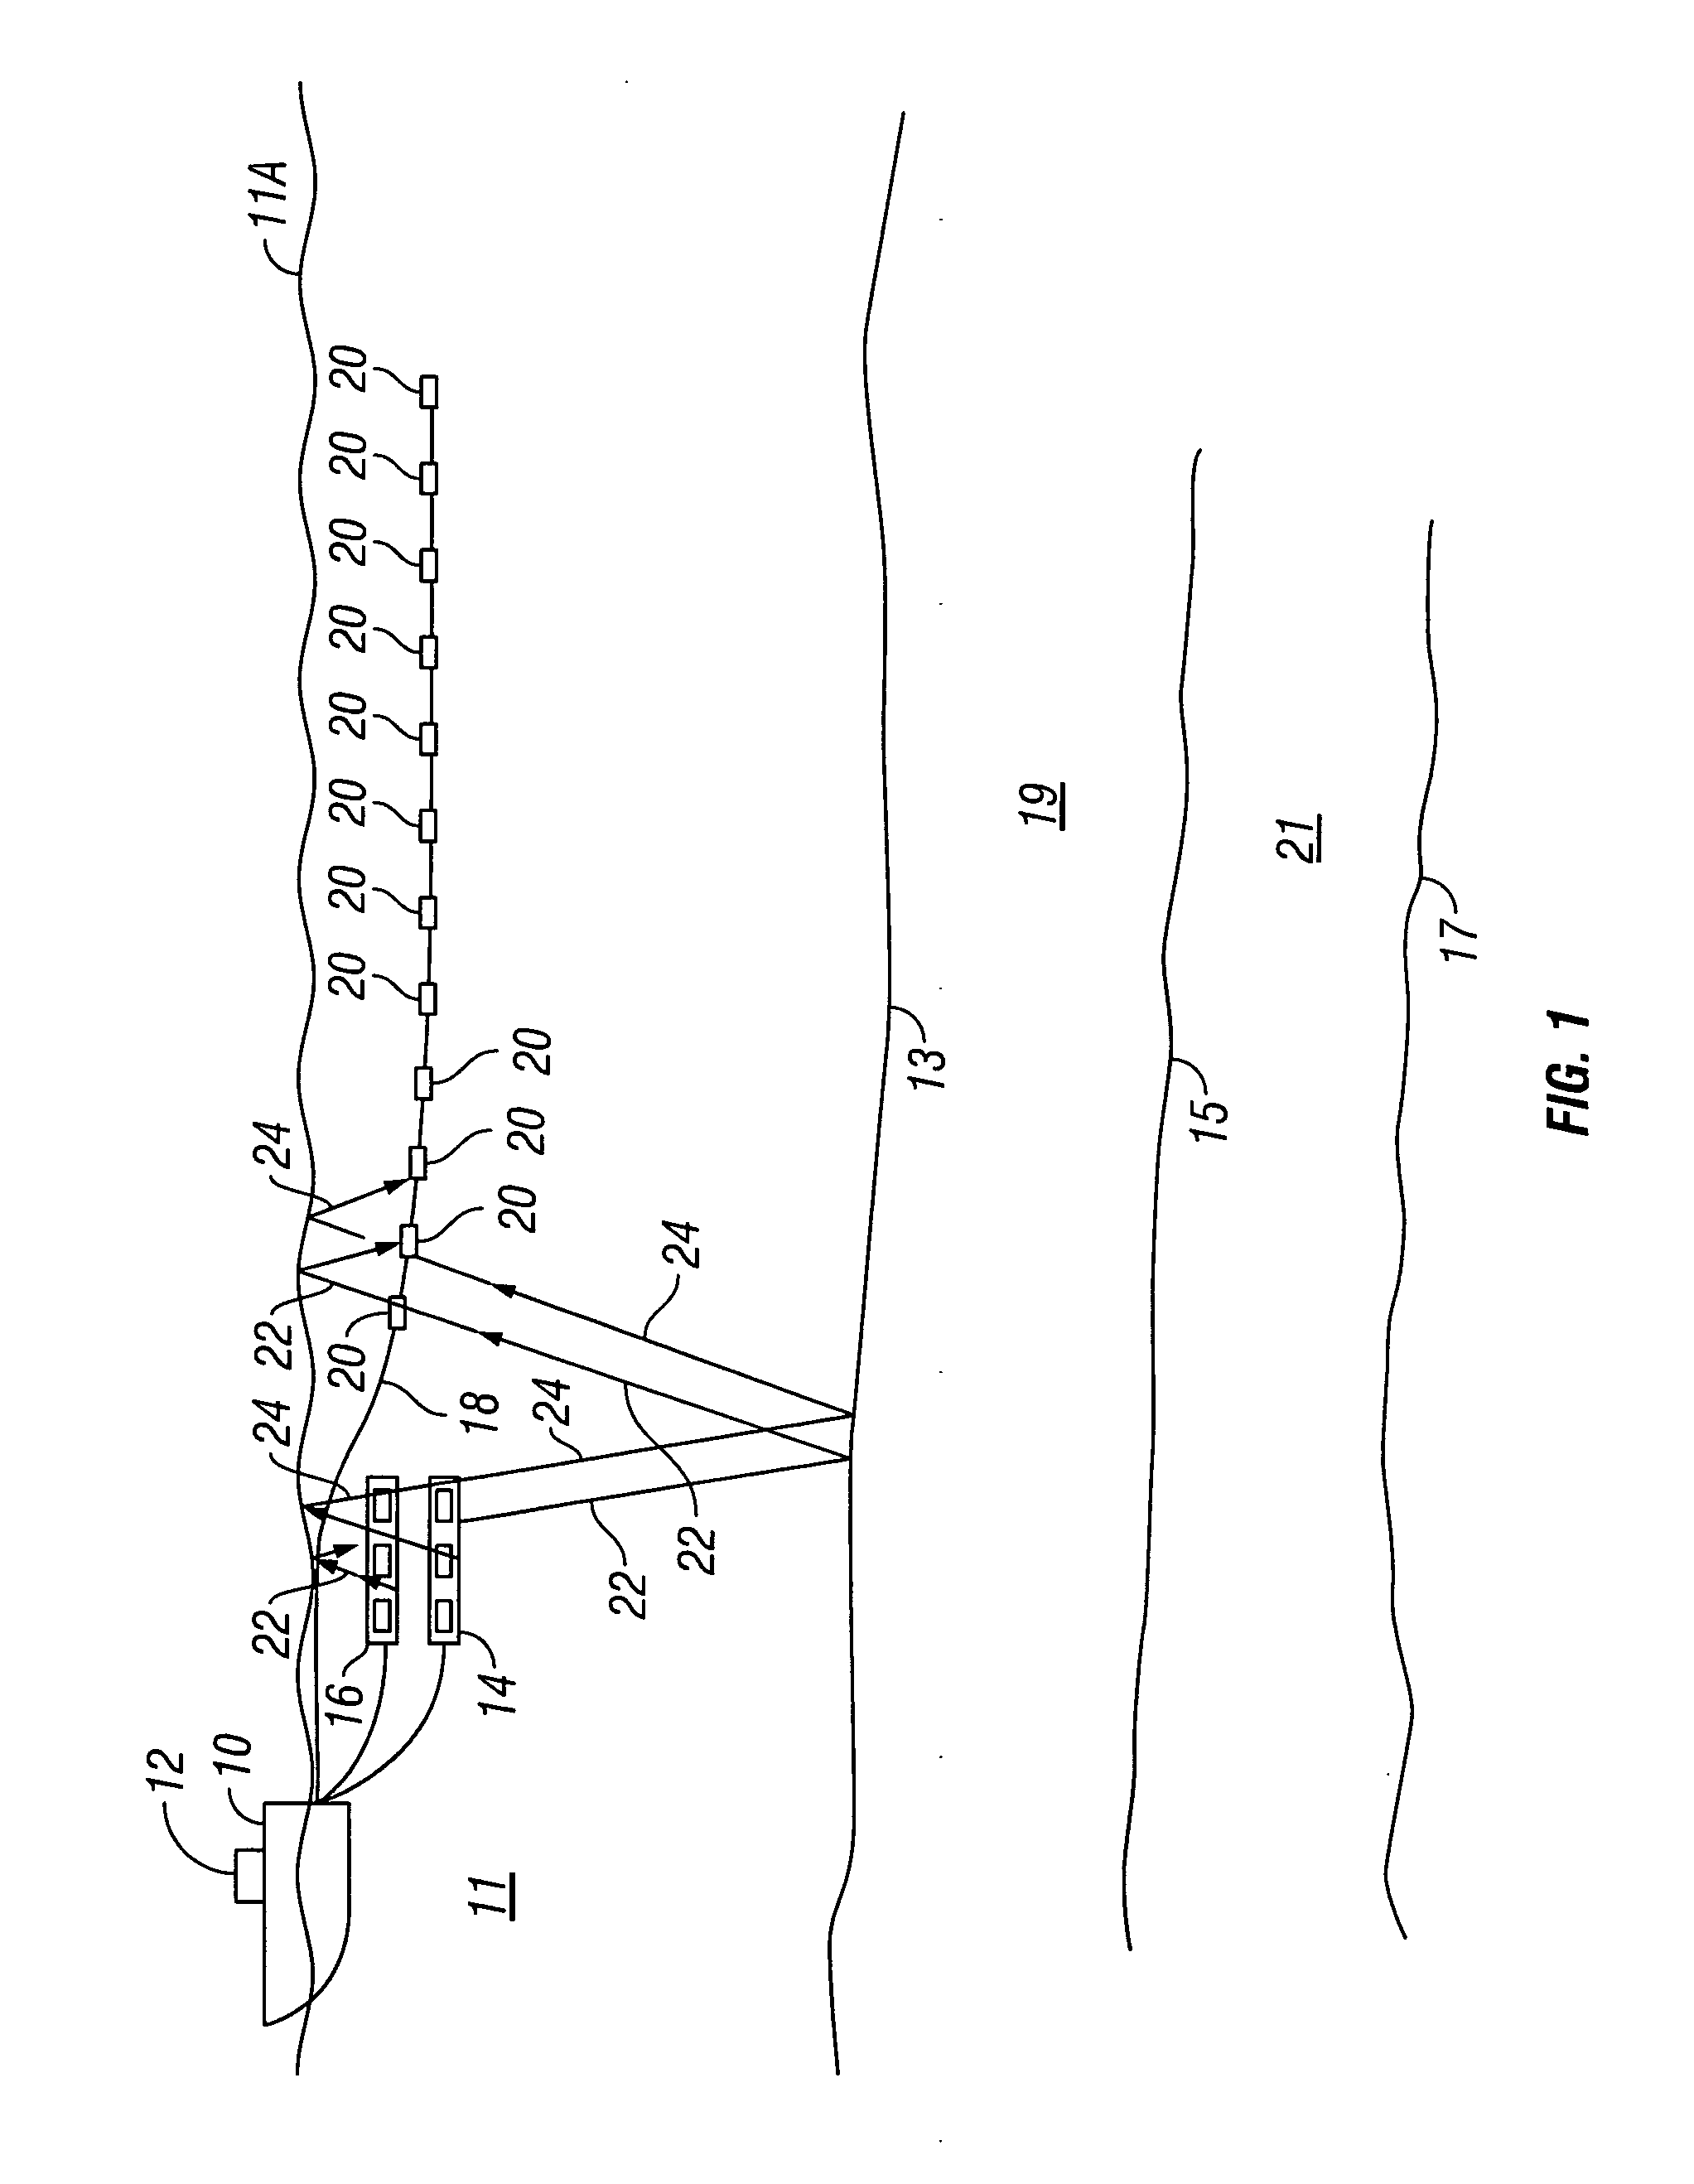 Method for aquiring and processing marine seismic data to extract and constructively use the up-going and down-going wave-fields emitted by the source(s)